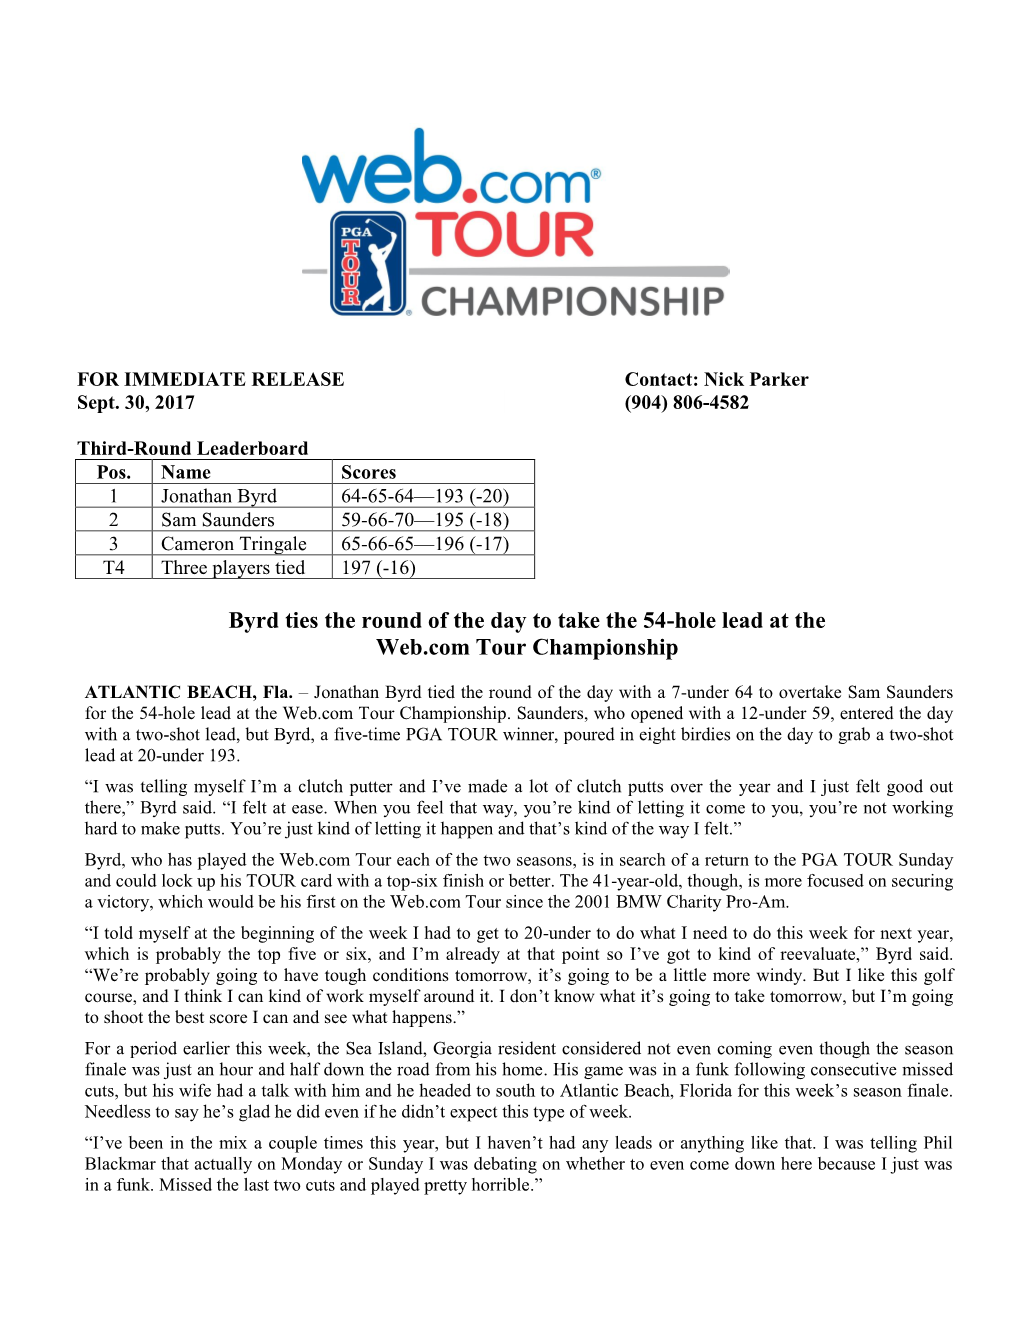 Byrd Ties the Round of the Day to Take the 54-Hole Lead at the Web.Com Tour Championship